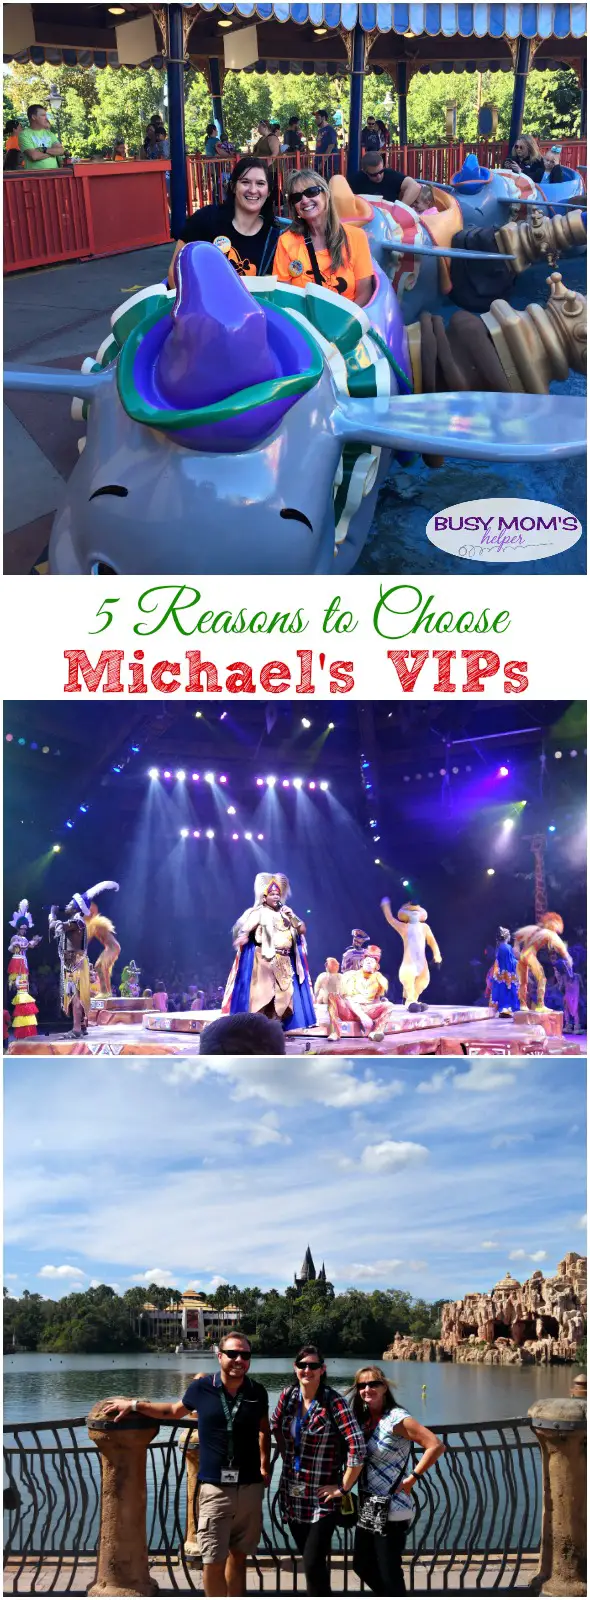 10 Reasons to Choose Michael's VIPs #hosted